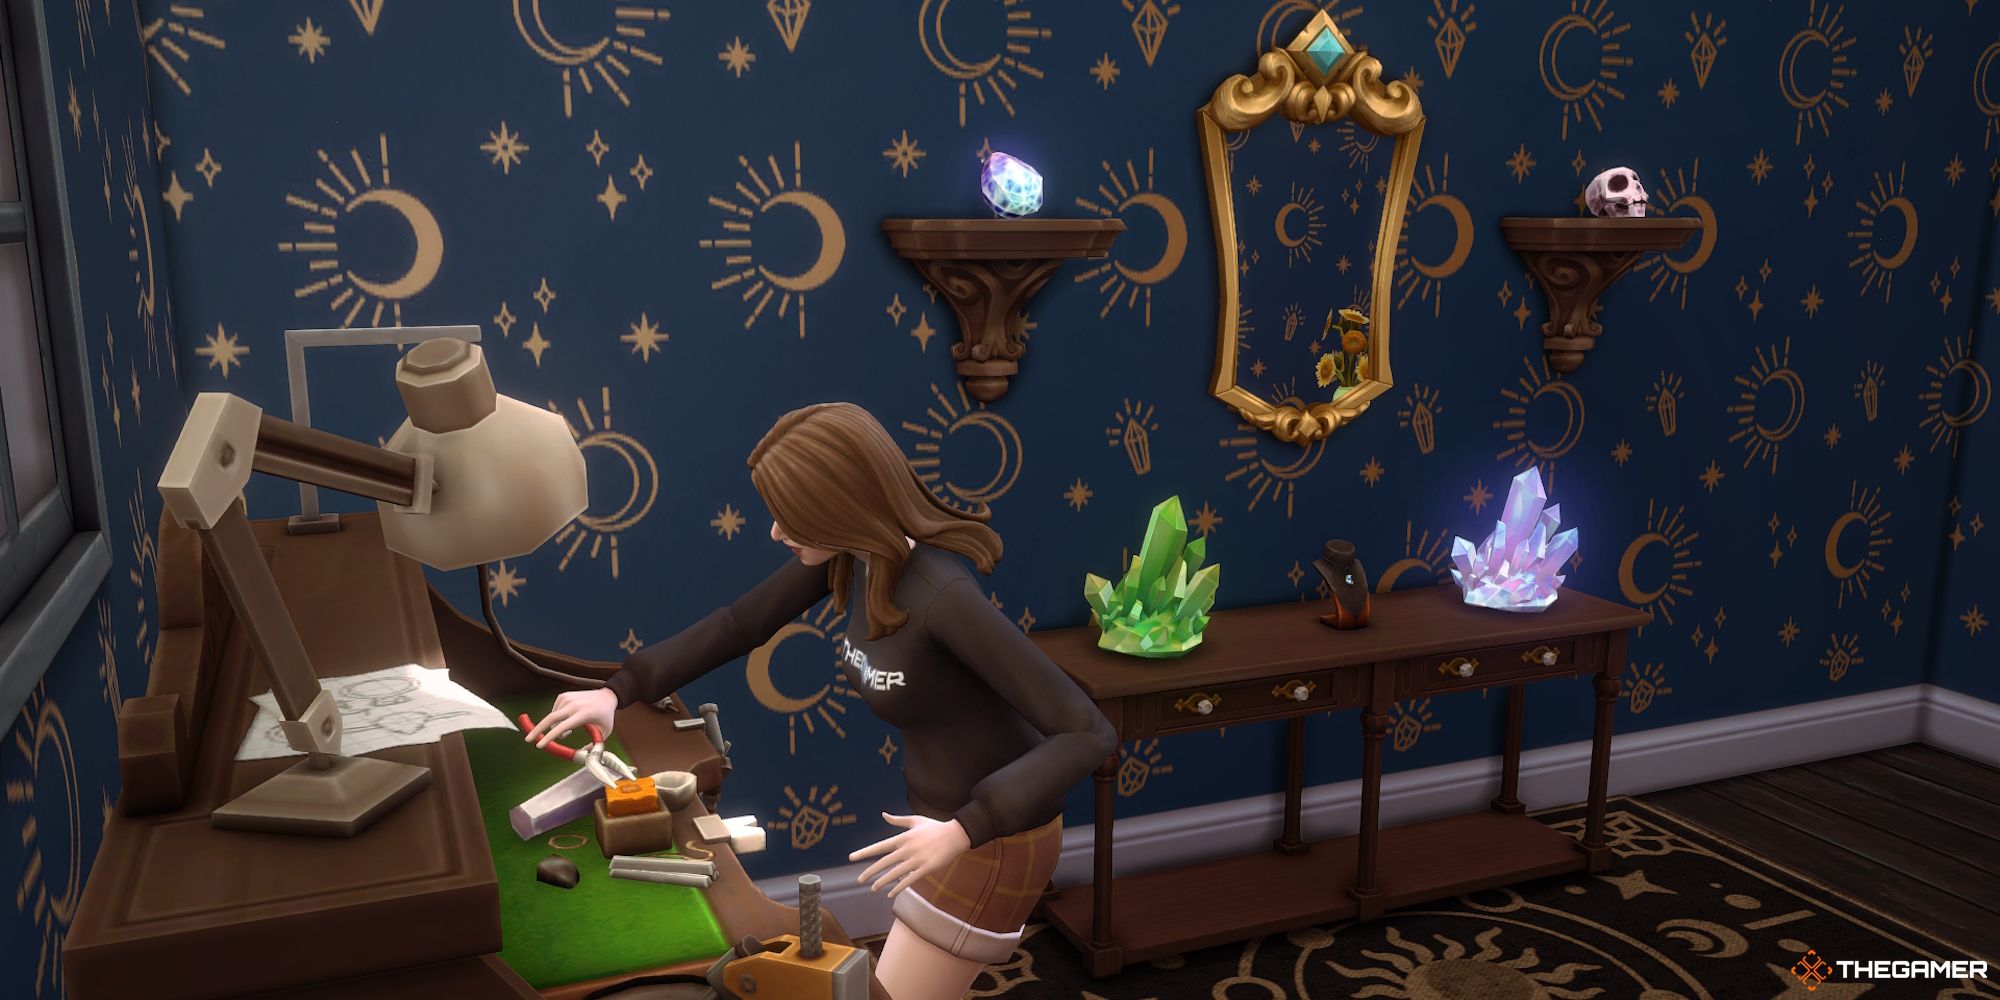 A Sim practices the Gemology skill in their gem room